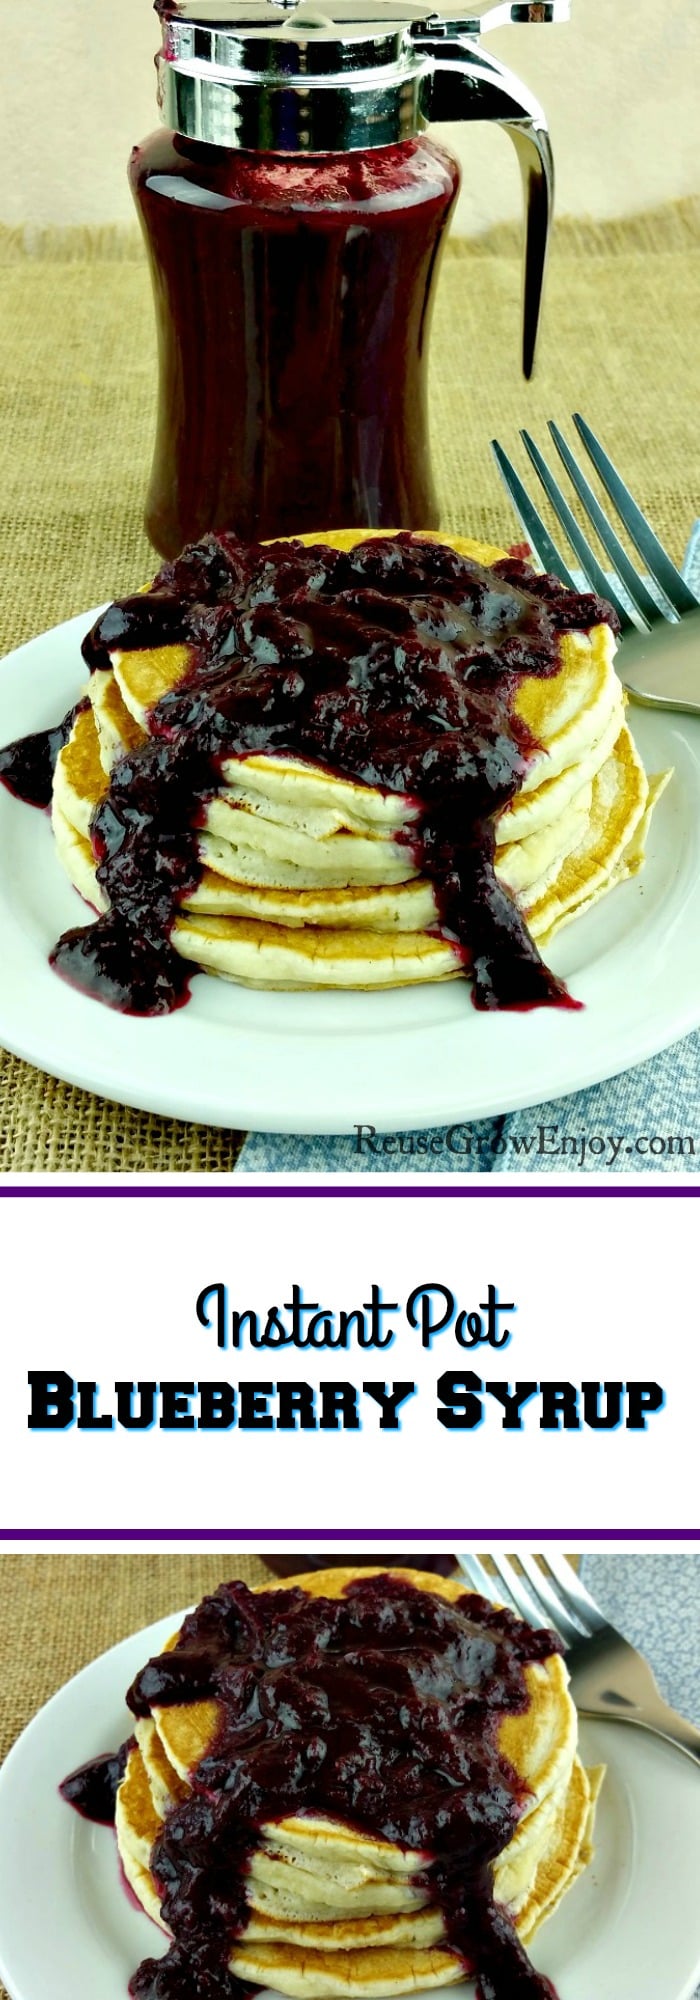 Have a ton of blueberries you need to use up? Check out this recipe for Instant Pot homemade blueberry syrup/sauce. Easy to make and oh so good! Plus it is Paleo and no refind sugar added.